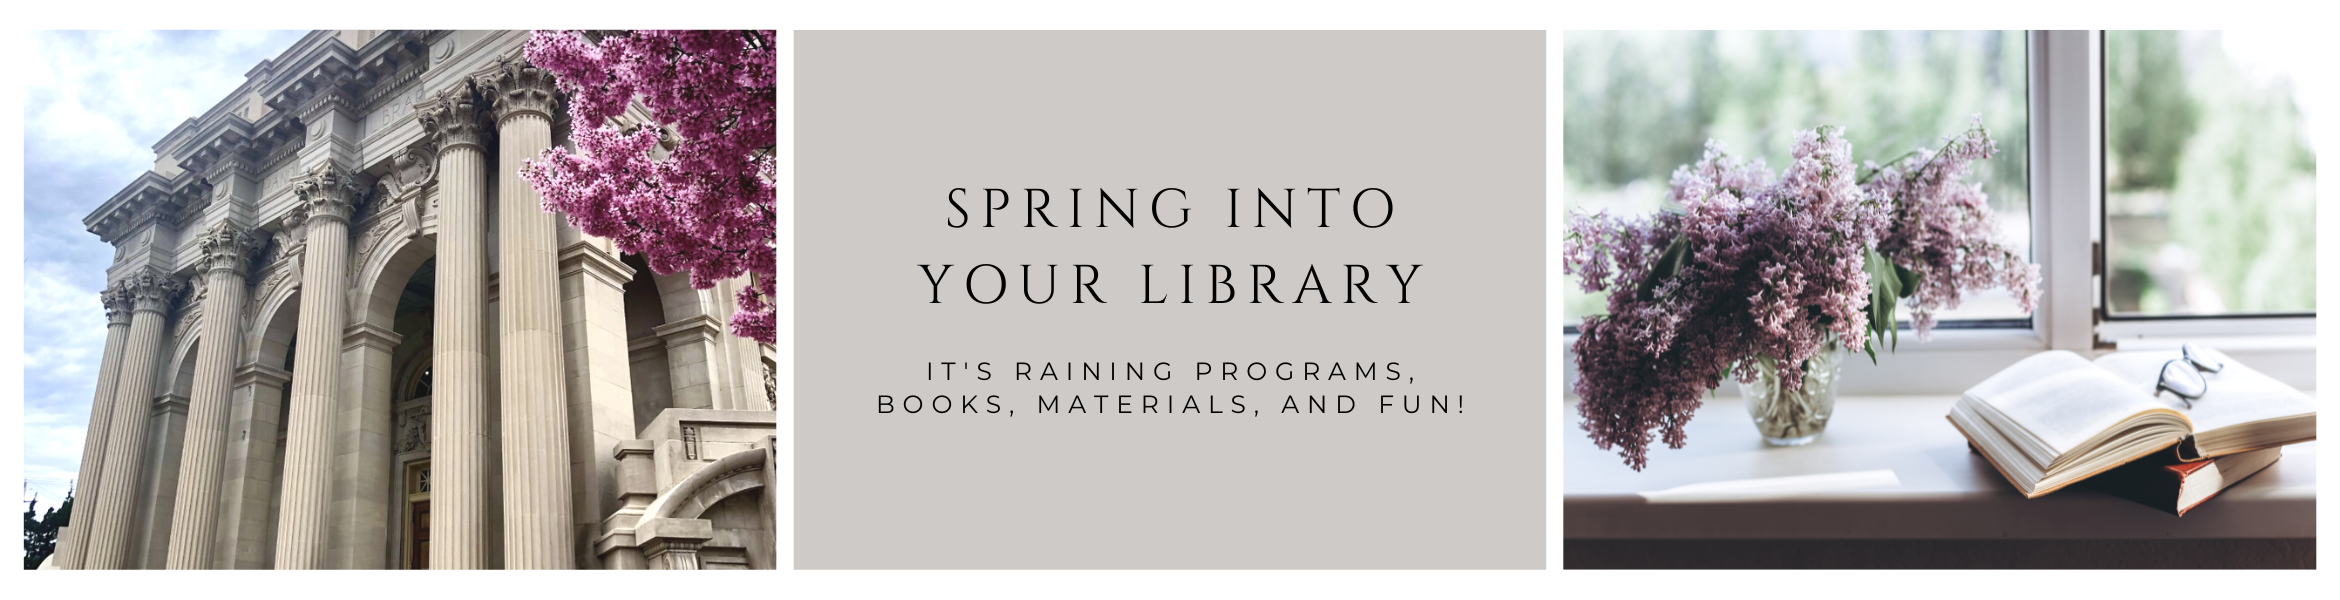 Spring Into Your Library